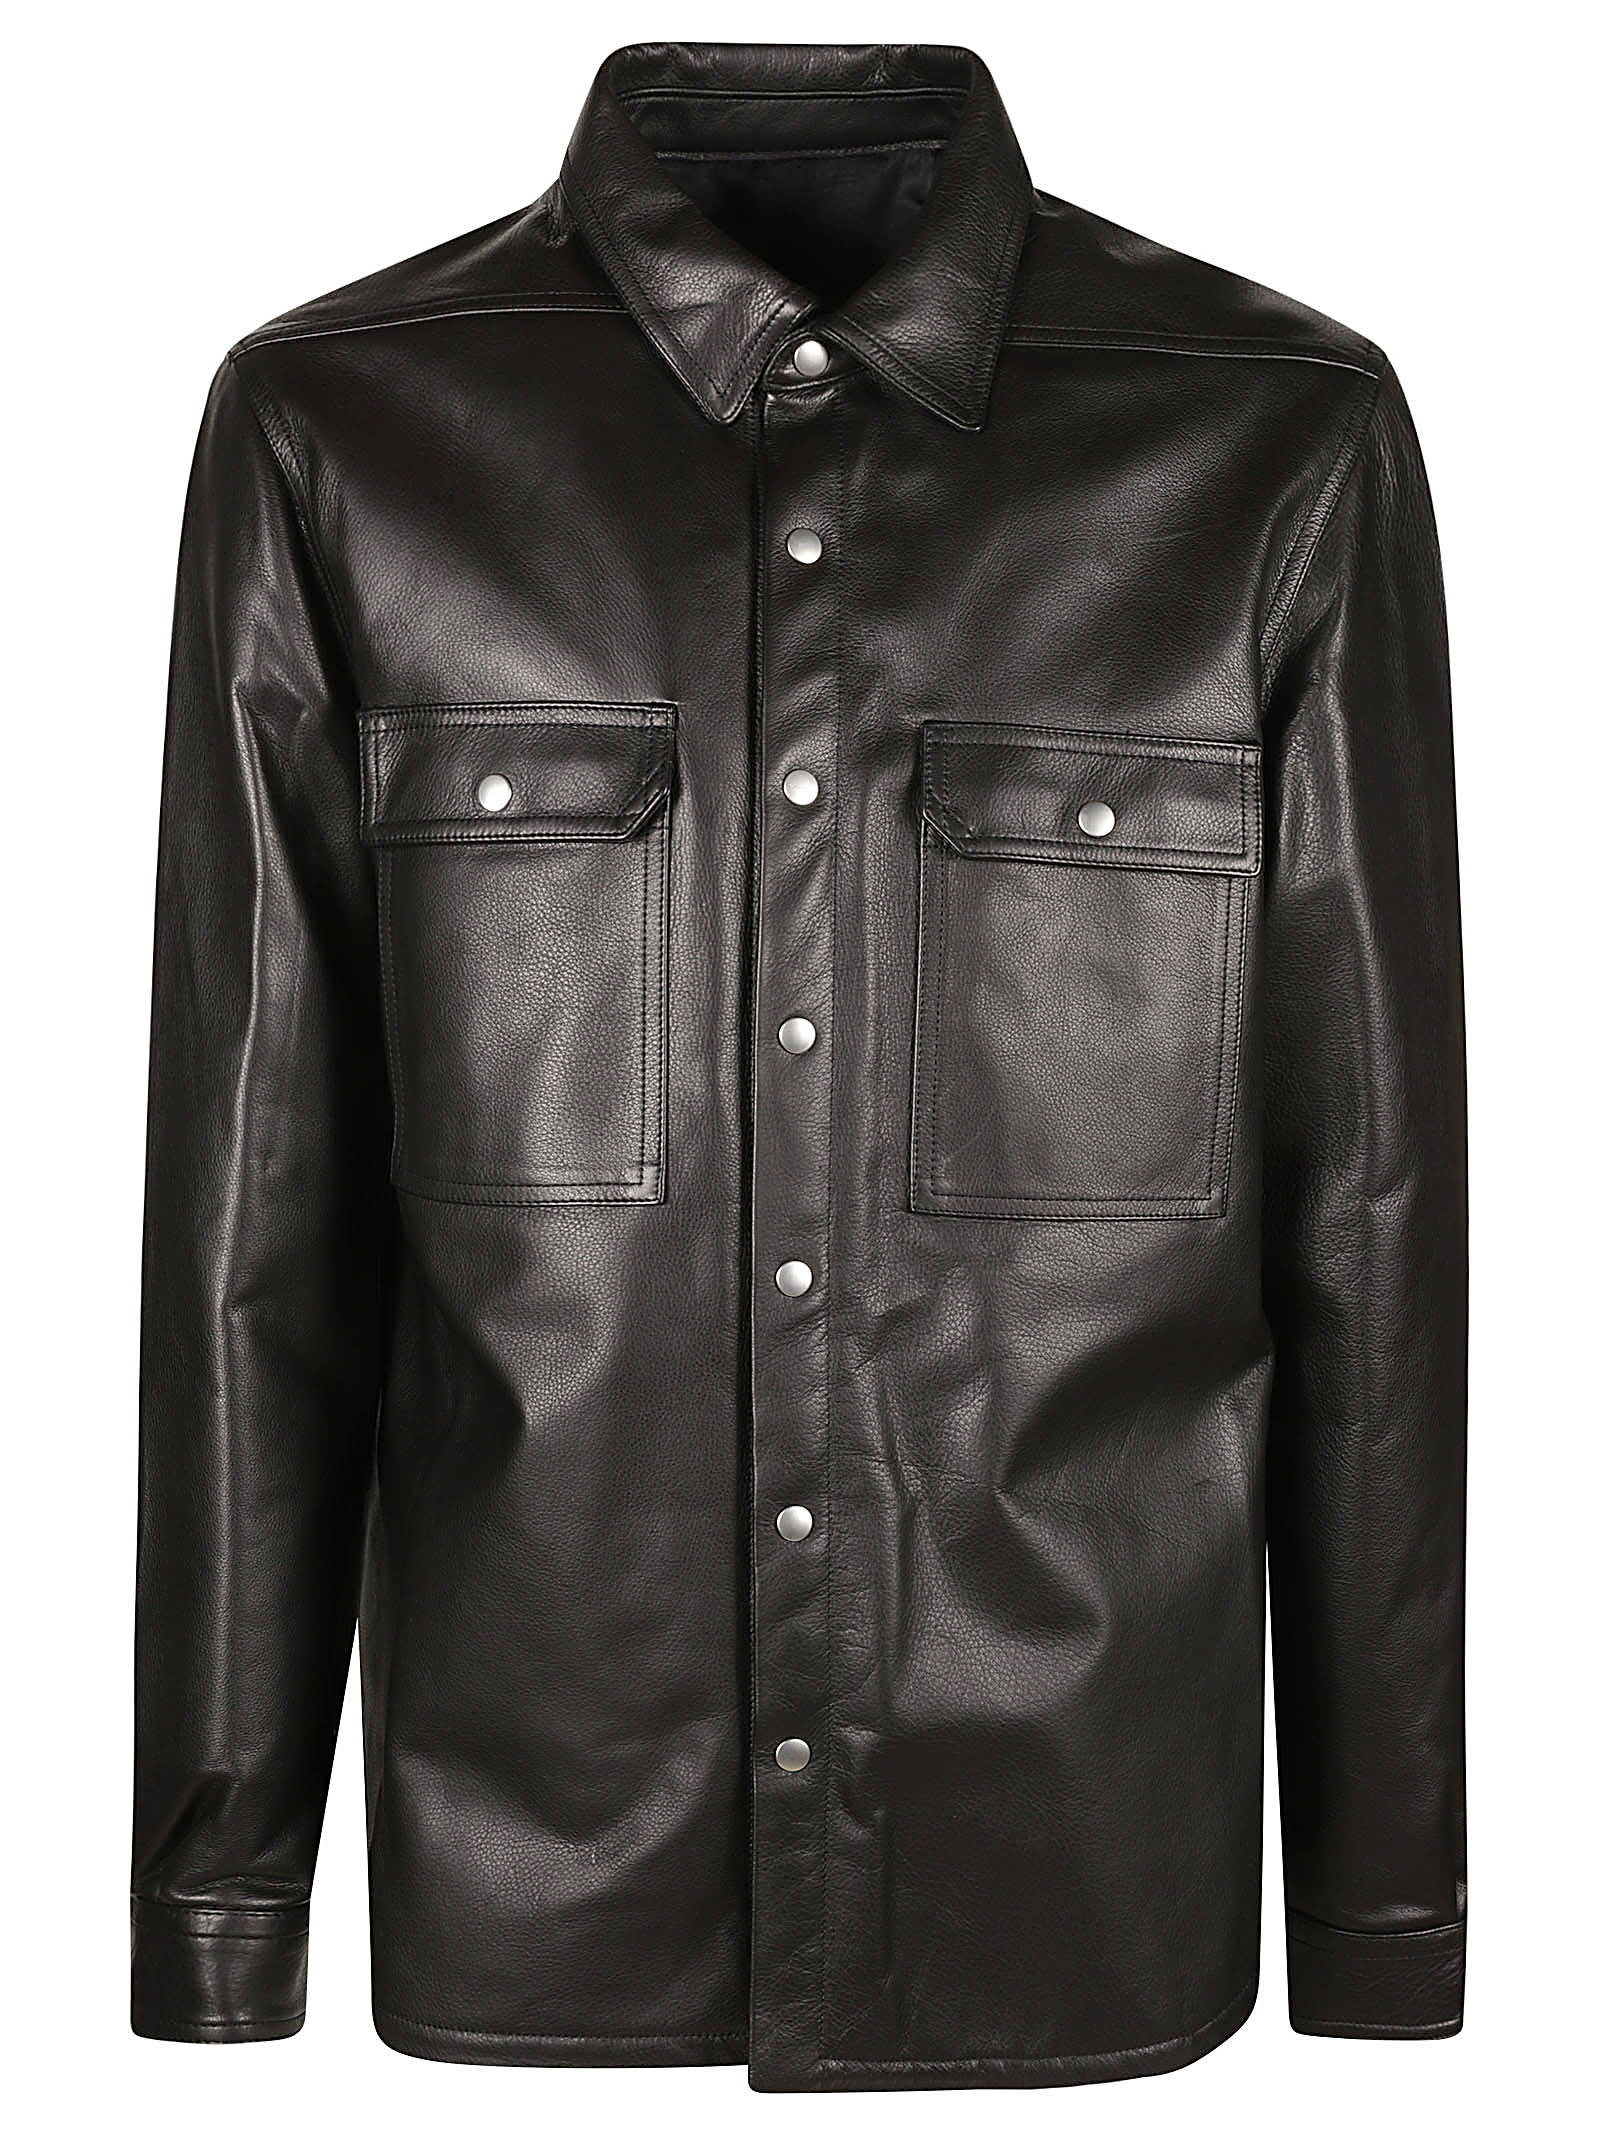 Rick Owens Leather Outershirt レザージャケット 通販 | italist